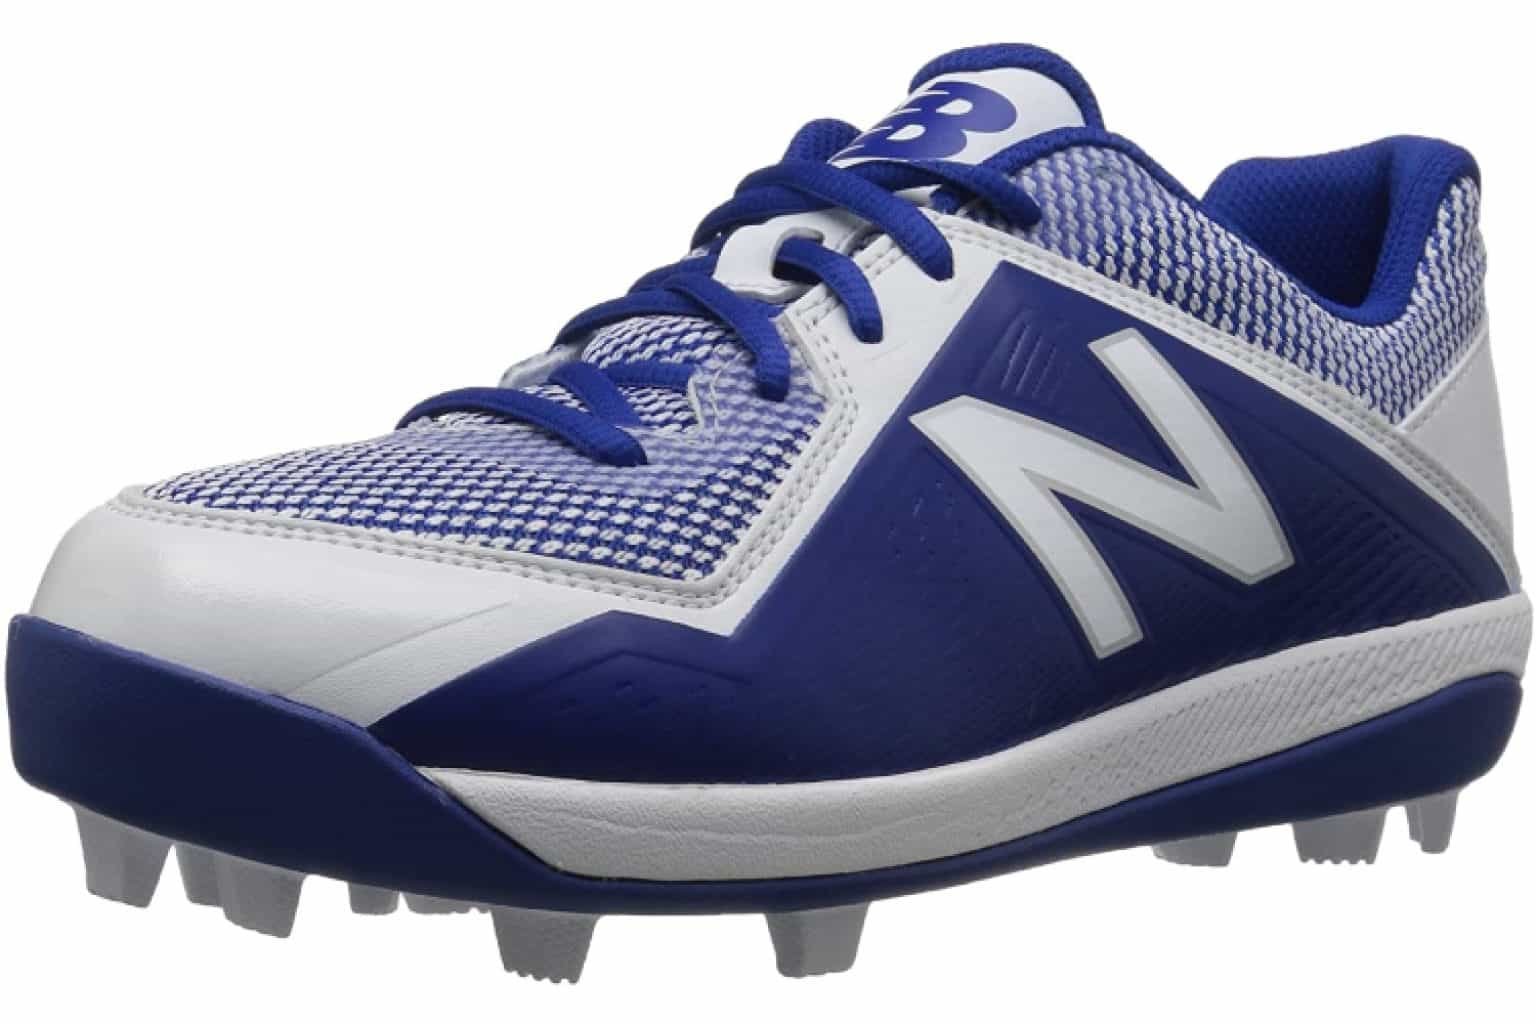 Best youth Baseball Cleats for wide feet | Top 6 wide cleats